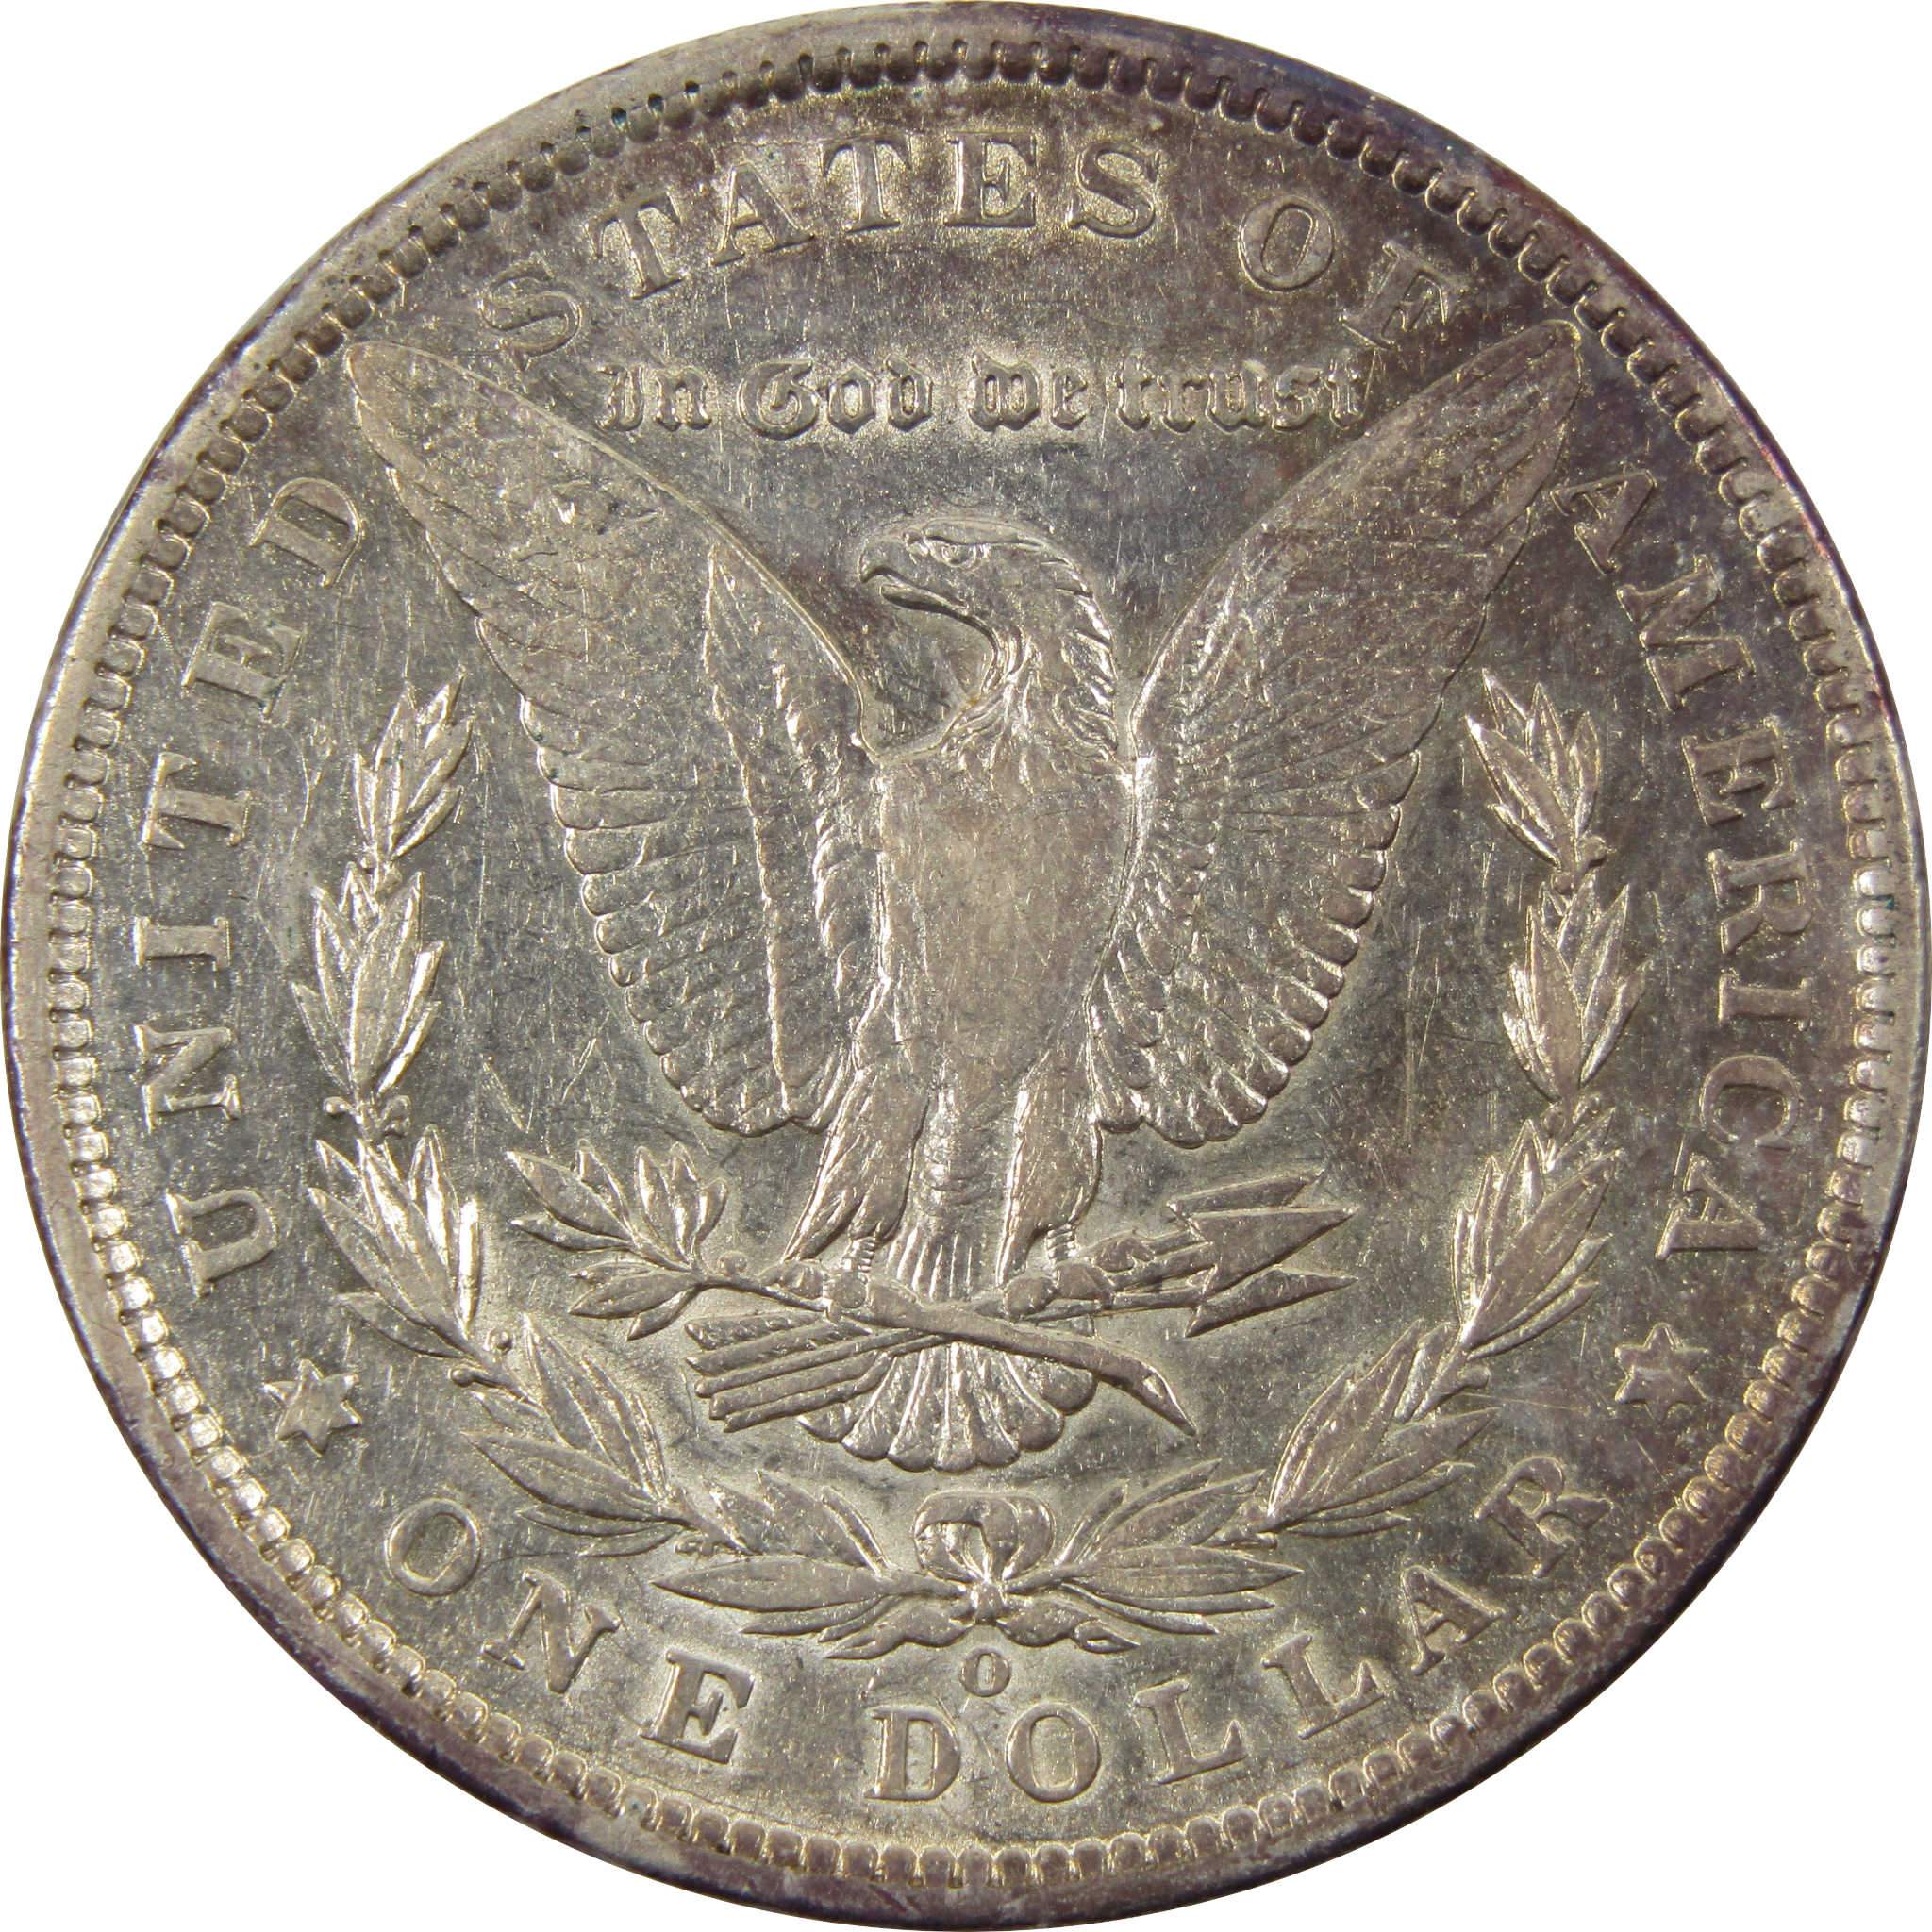 1897 O Morgan Dollar XF EF Extremely Fine 90% Silver $1 Coin SKU:I9410 - Morgan coin - Morgan silver dollar - Morgan silver dollar for sale - Profile Coins &amp; Collectibles